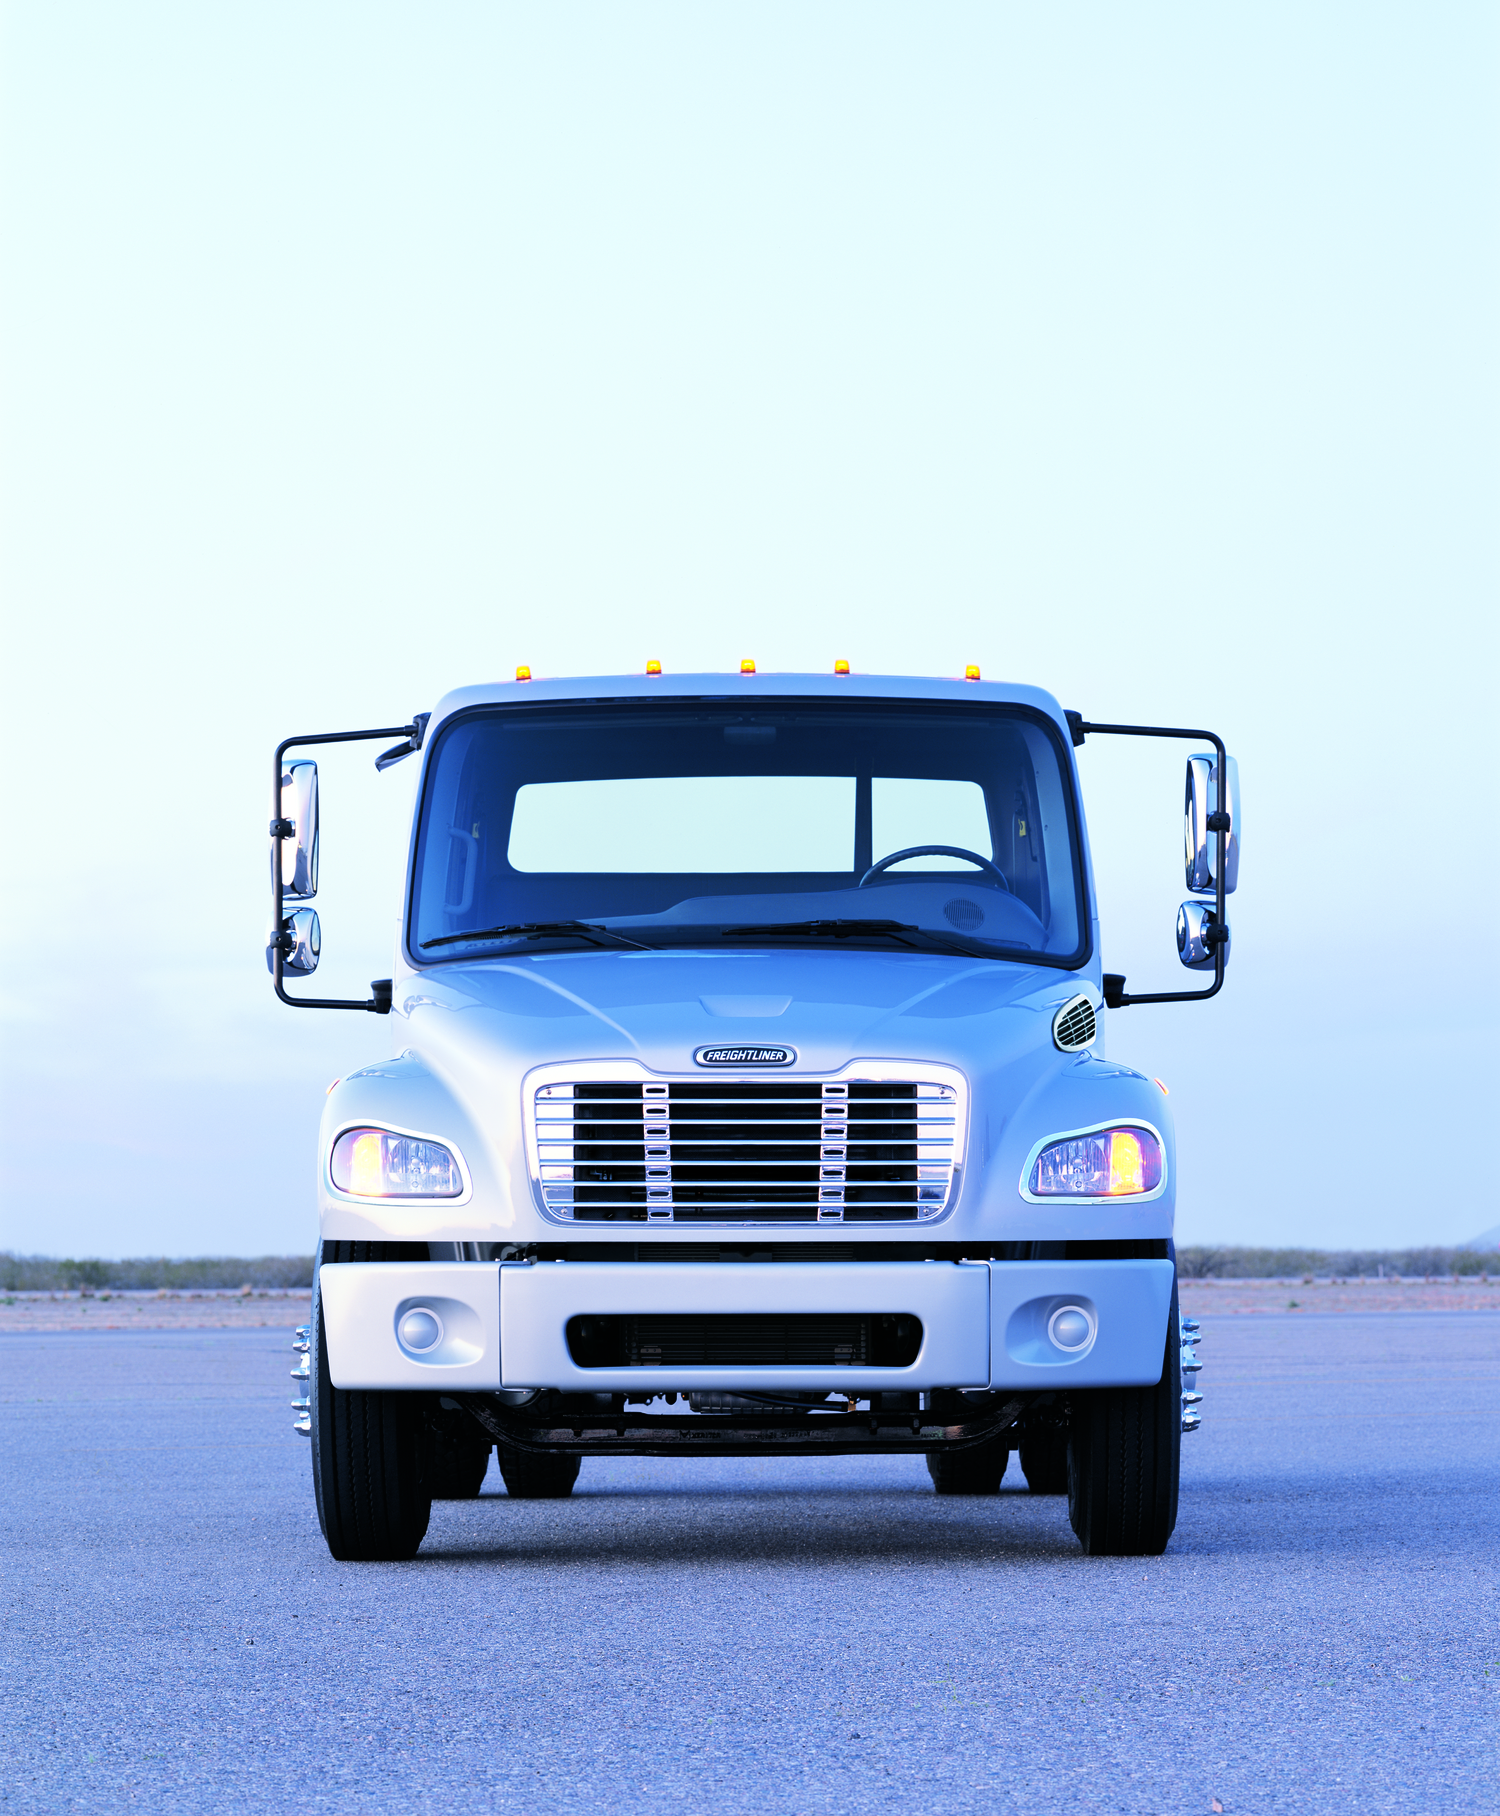 What are some common specs of Freightliner trucks?